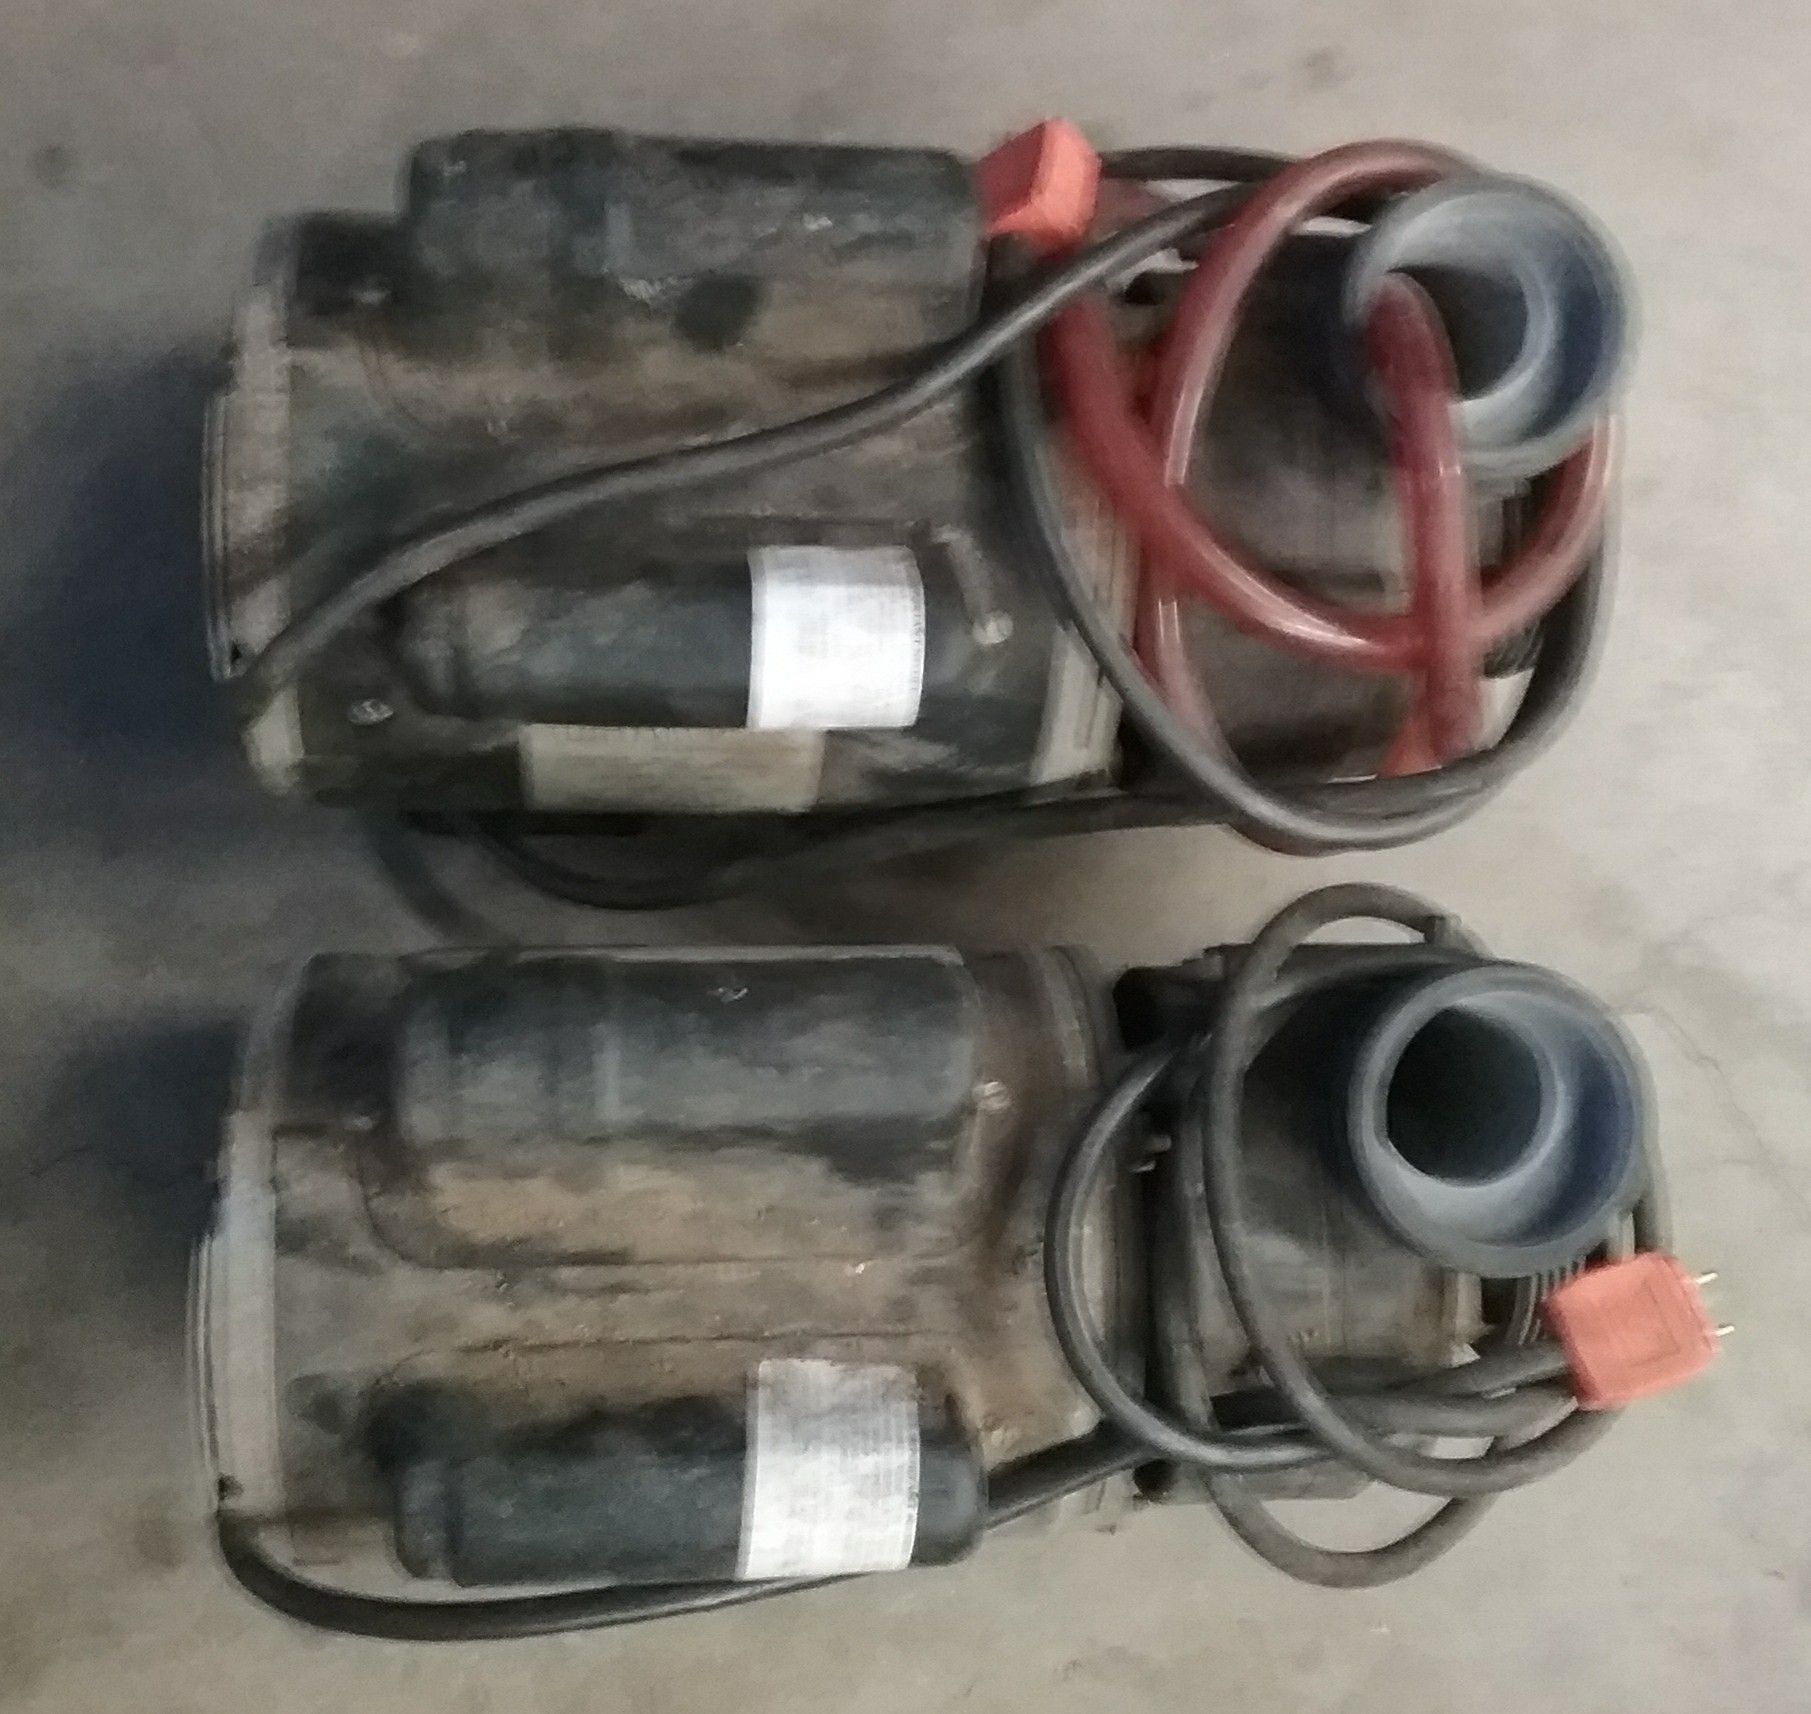 Jacuzzi hot tub pumps removed from working unit